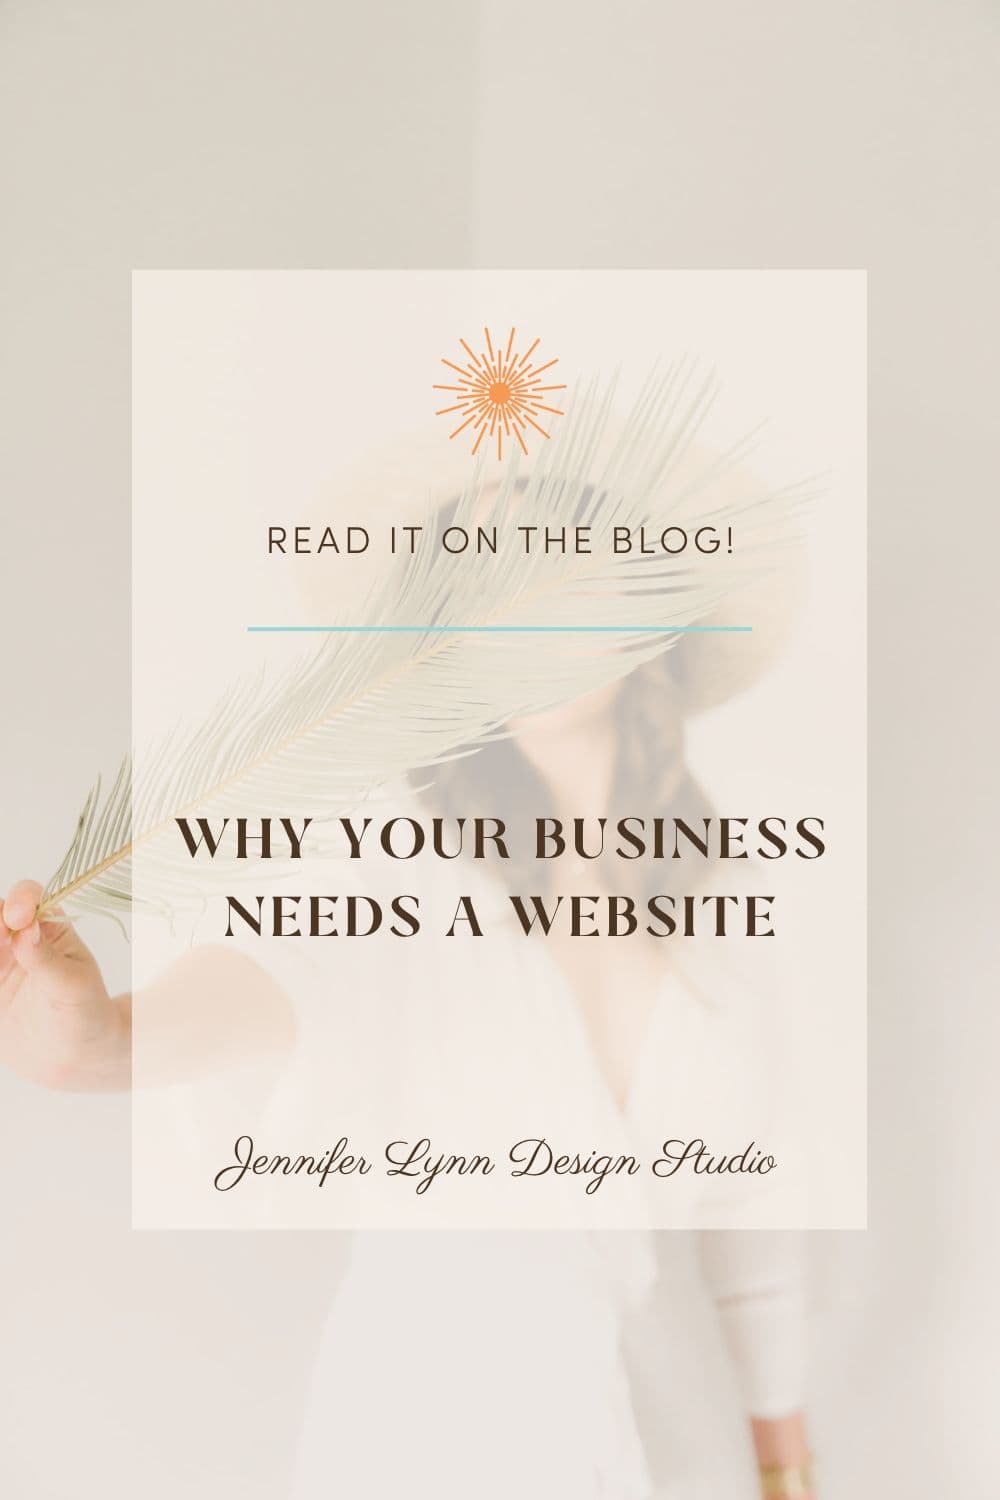 Why Your Business Needs a Website by Jennifer Lynn Design Studio